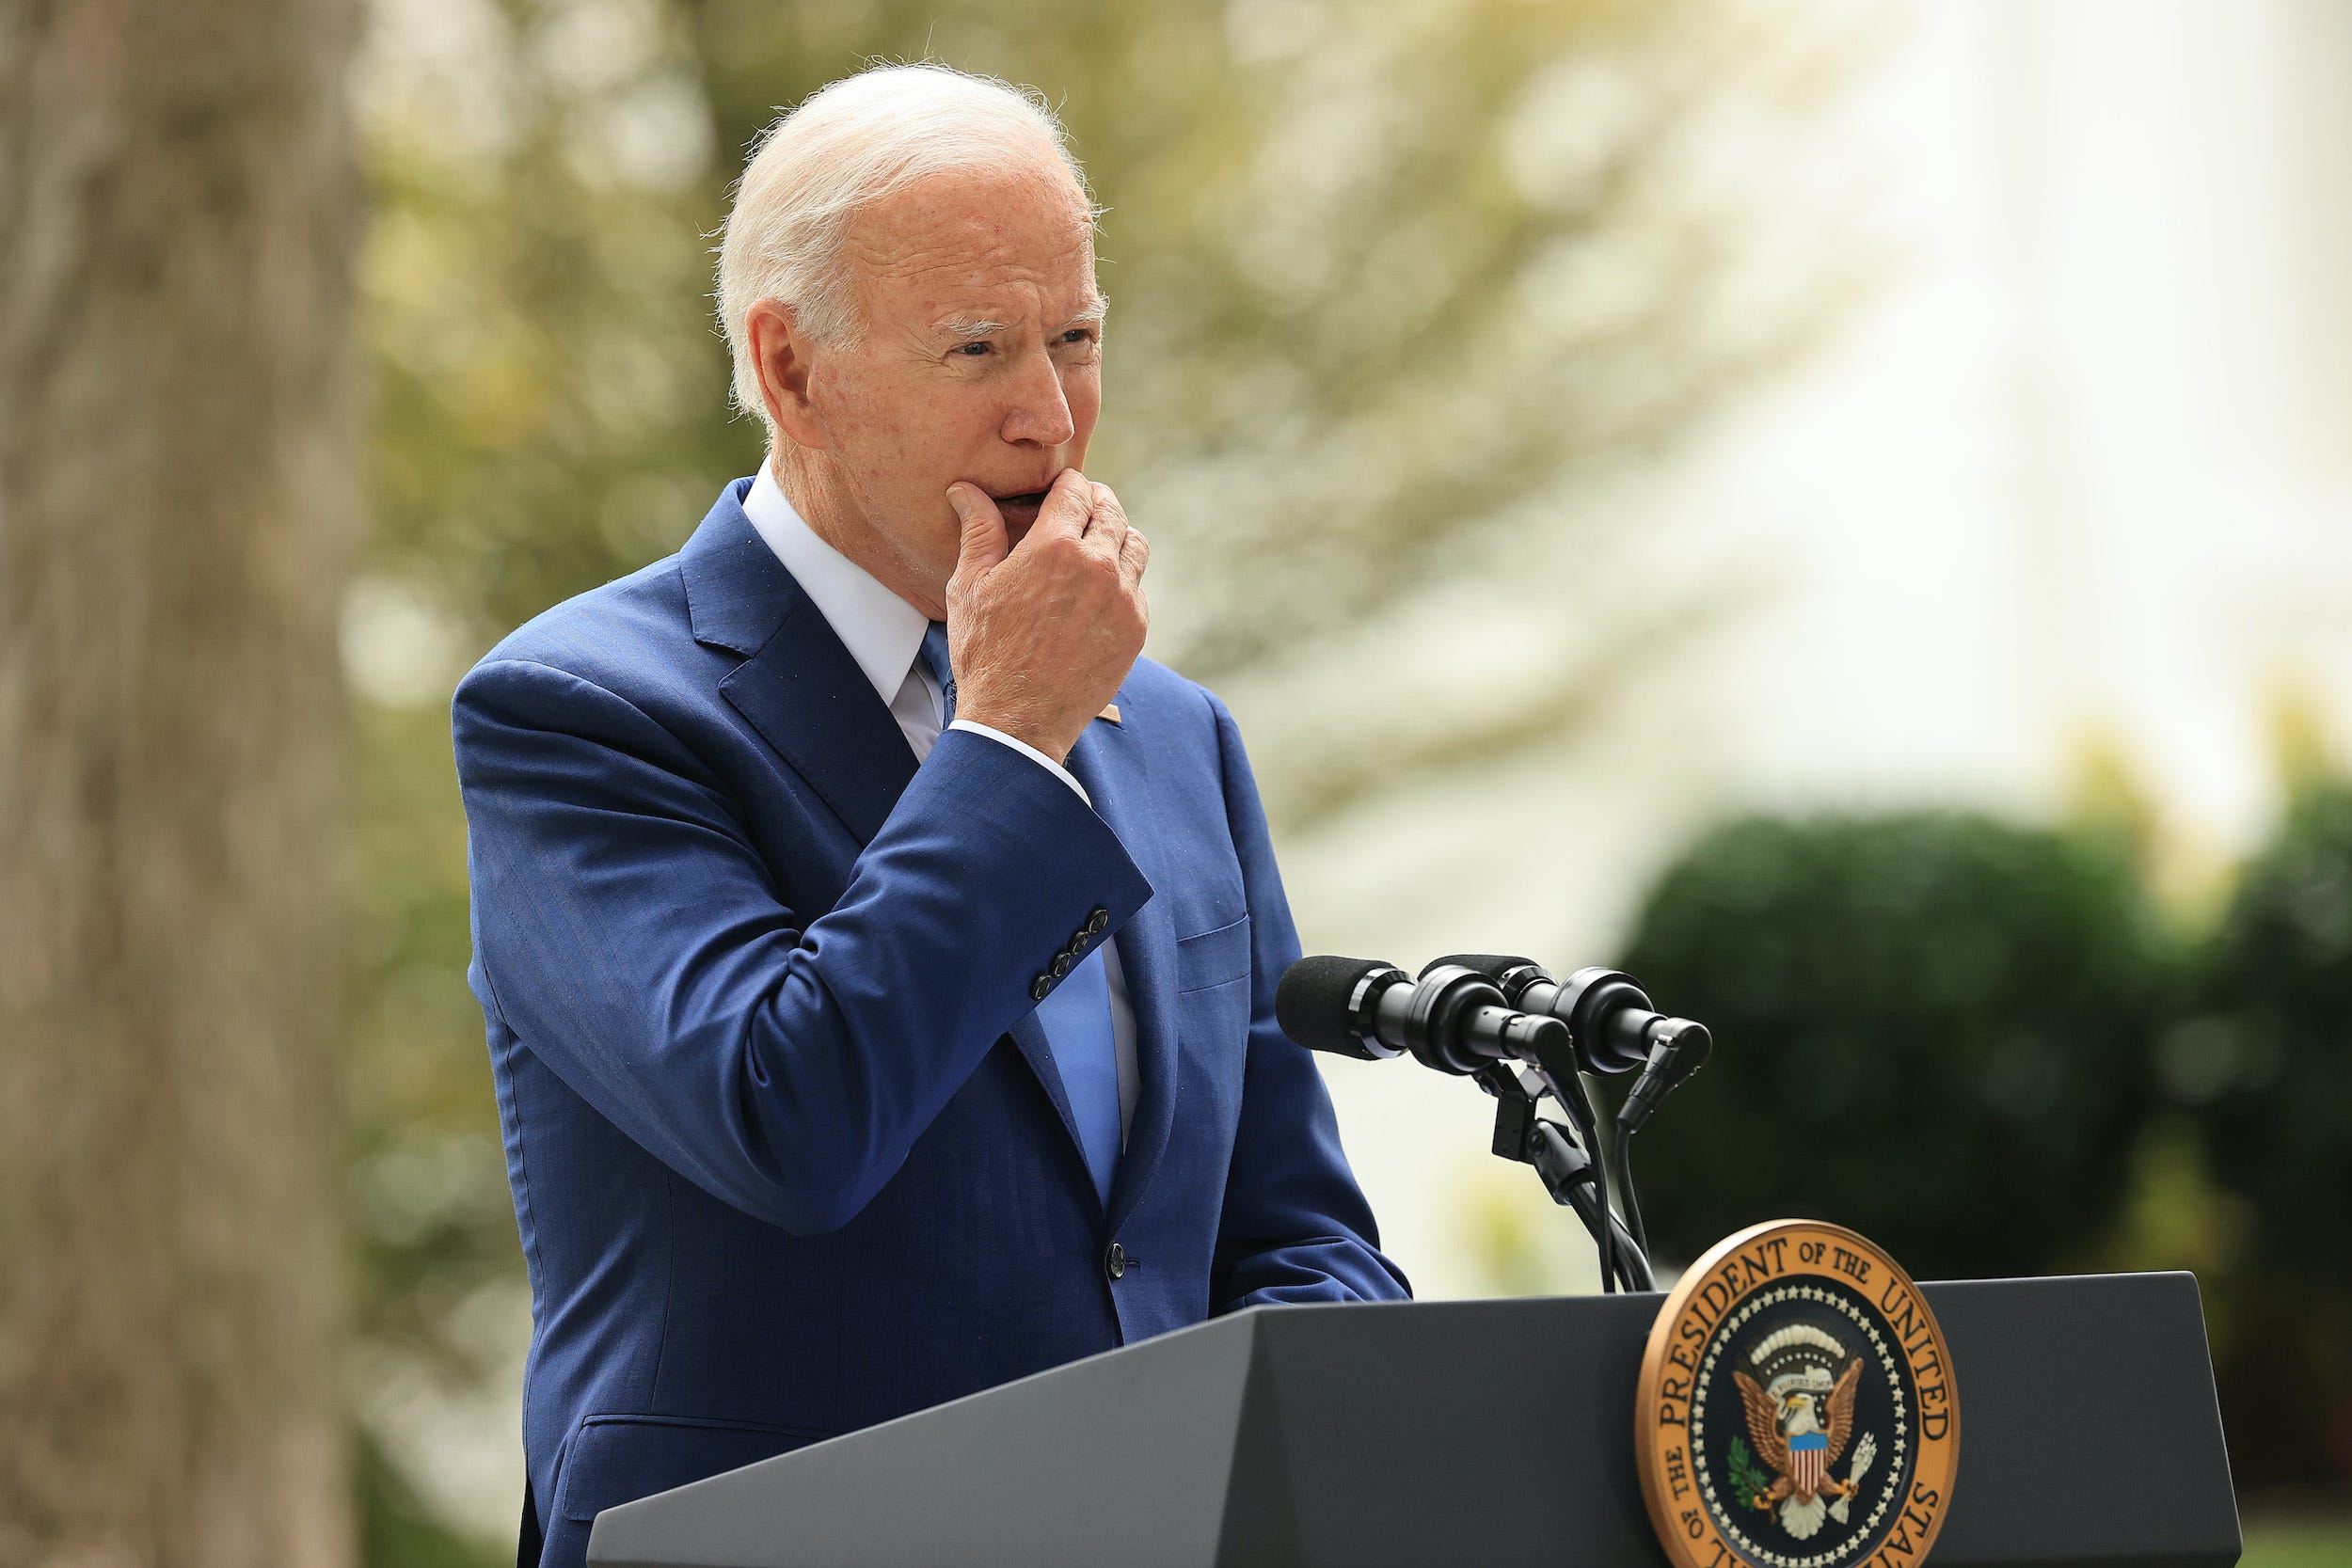 President Joe Biden stands outside behind a podium with the presidential seal, grabbing his chin and slightly covering his mouth in a pensive look.